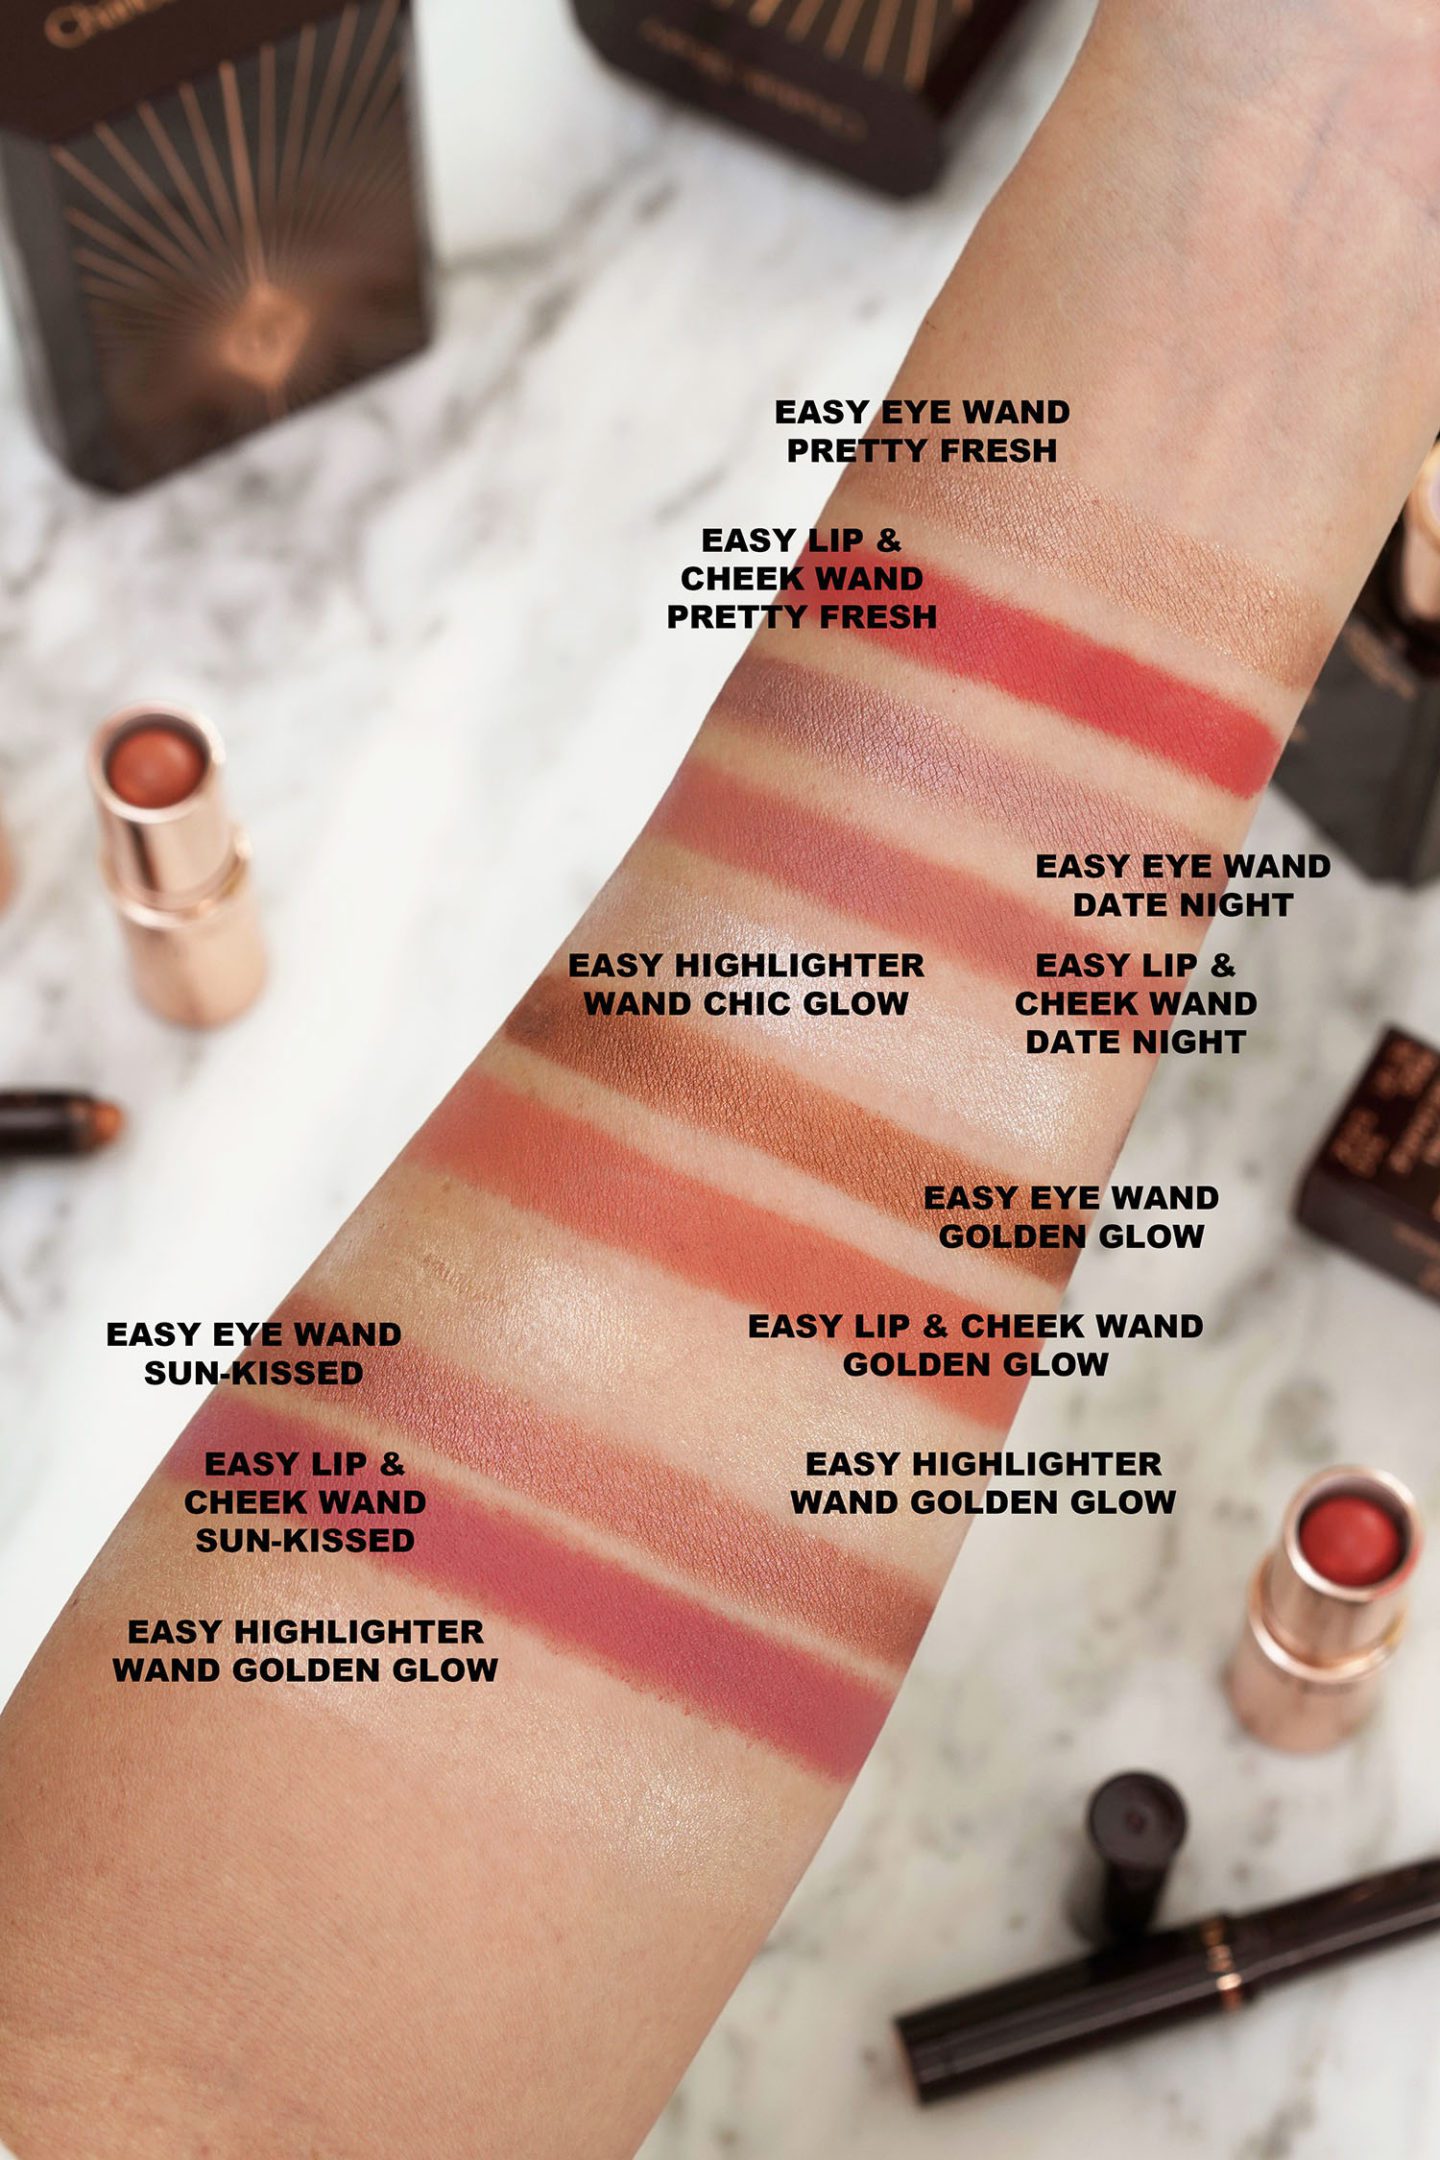 Charlotte Tilbury Quick and Easy swatches